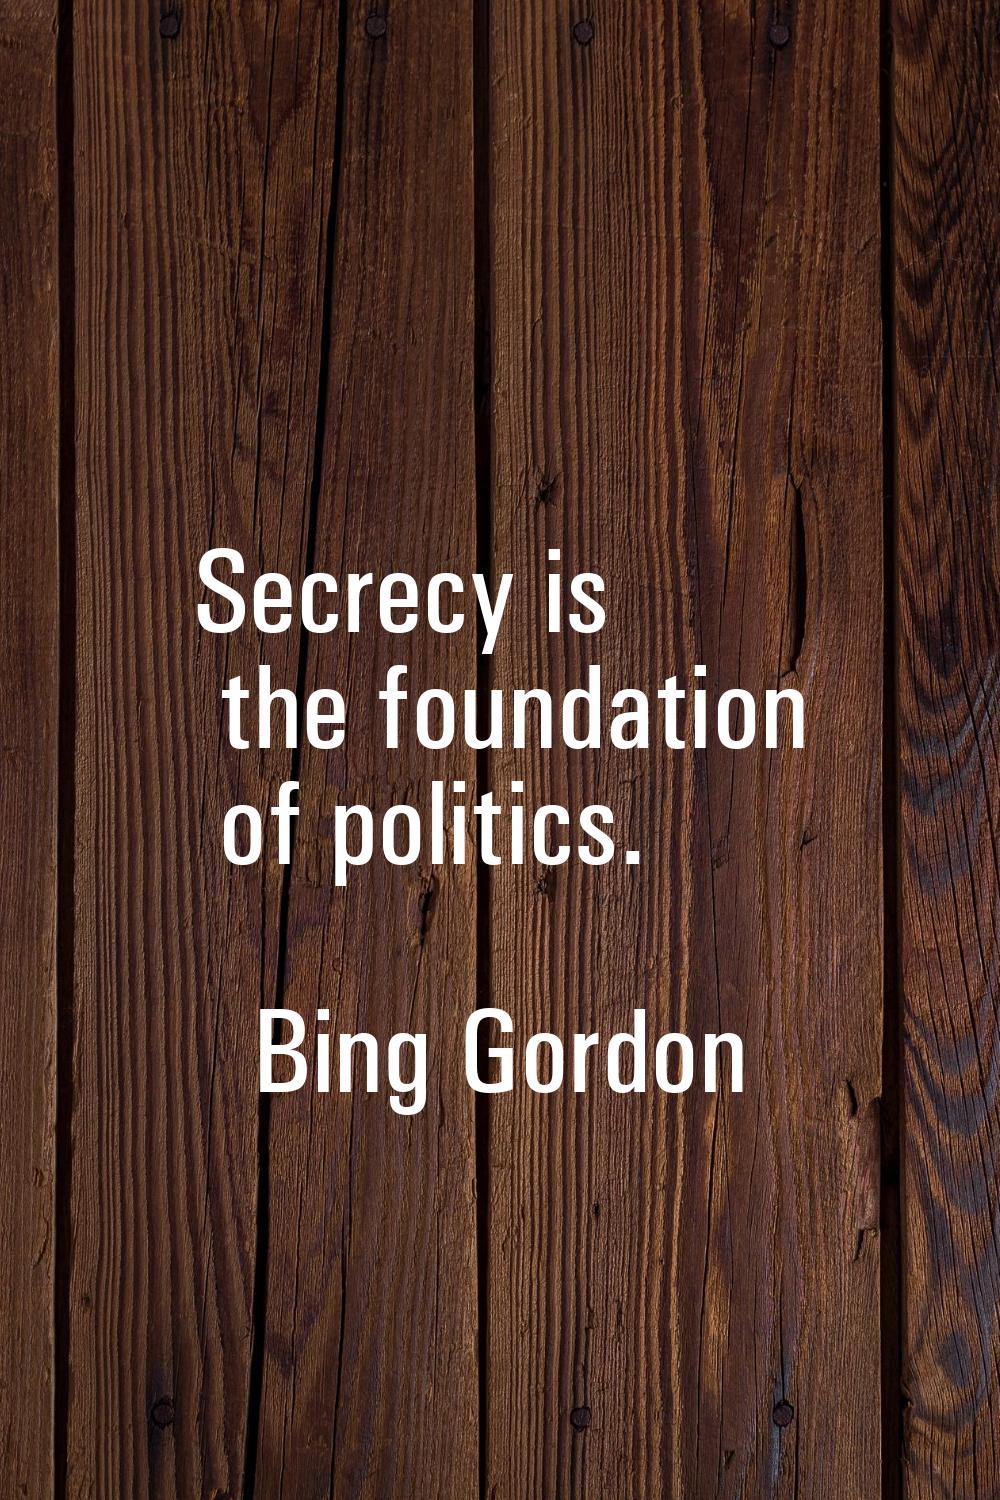 Secrecy is the foundation of politics.